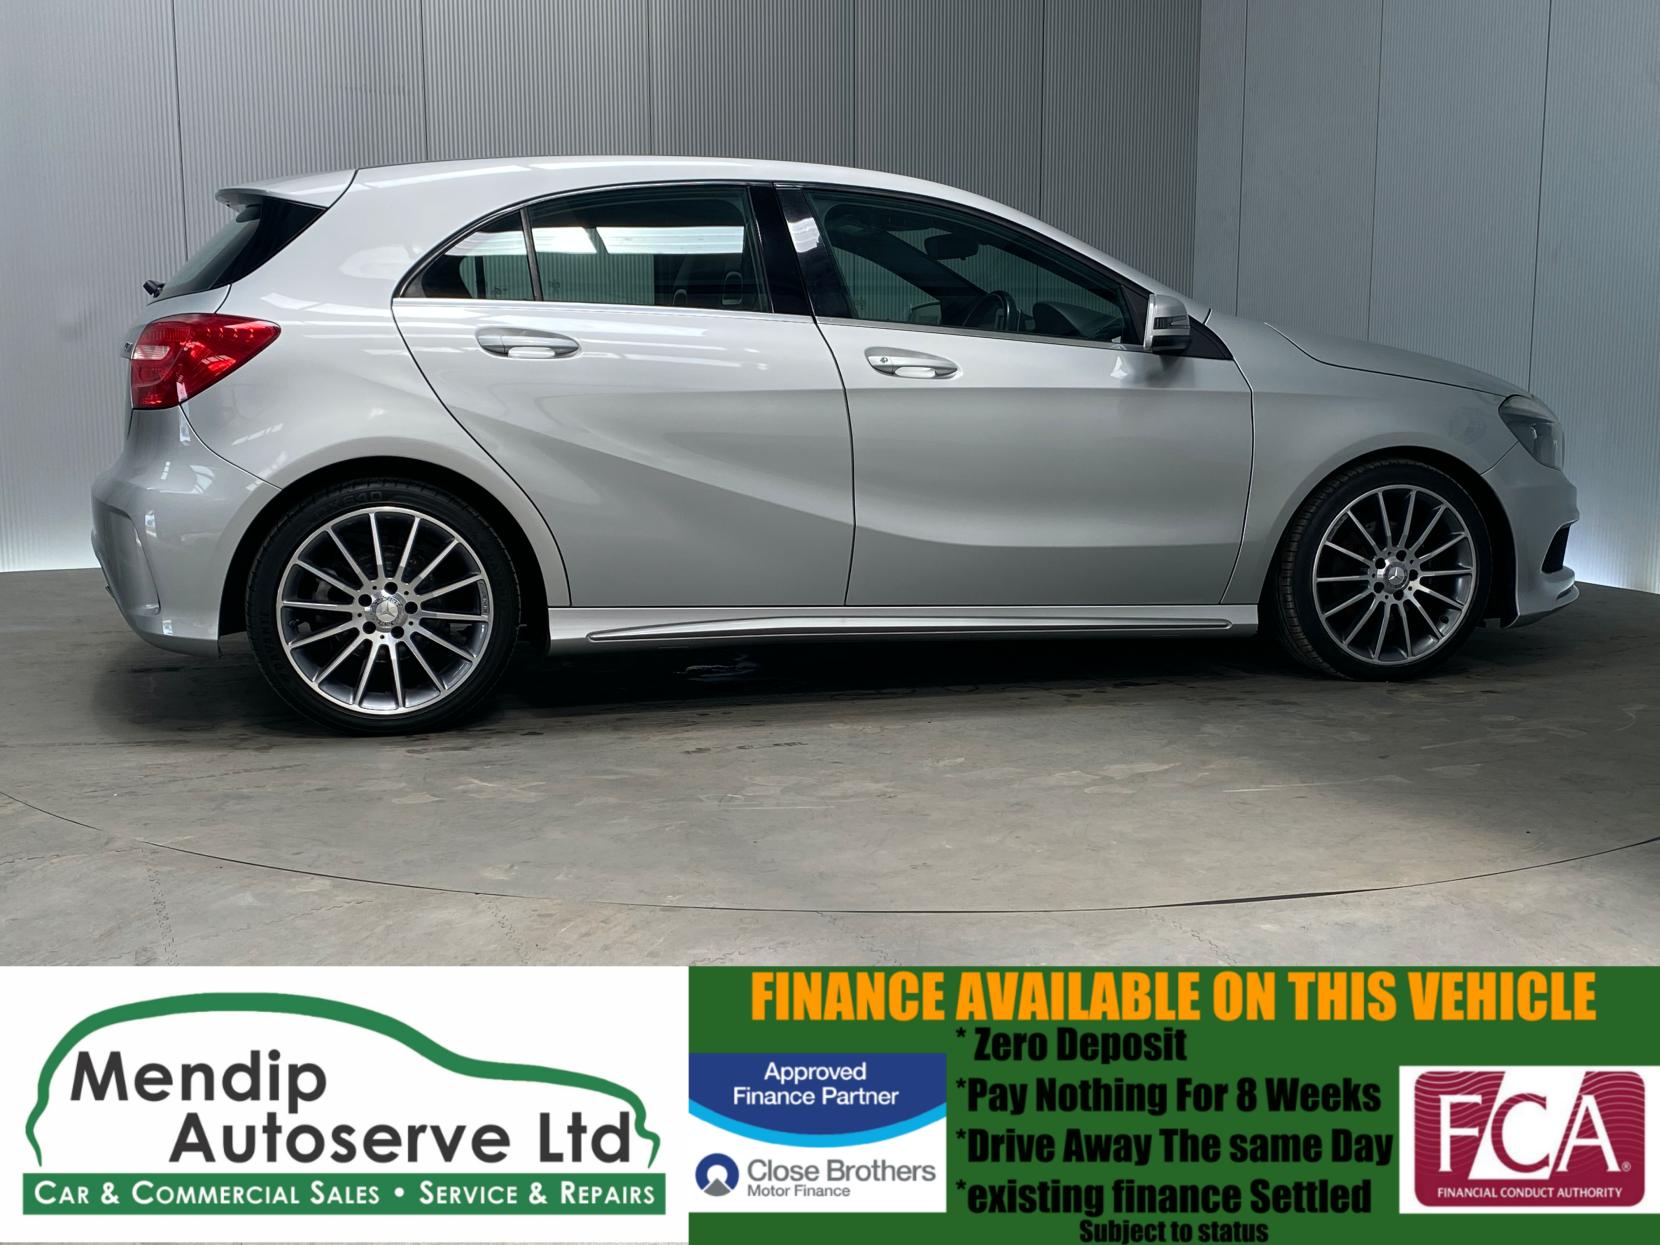 Mercedes-Benz A Class 1.5 A180 CDI AMG Sport Hatchback 5dr Diesel Manual Euro 6 (s/s) (109 ps)